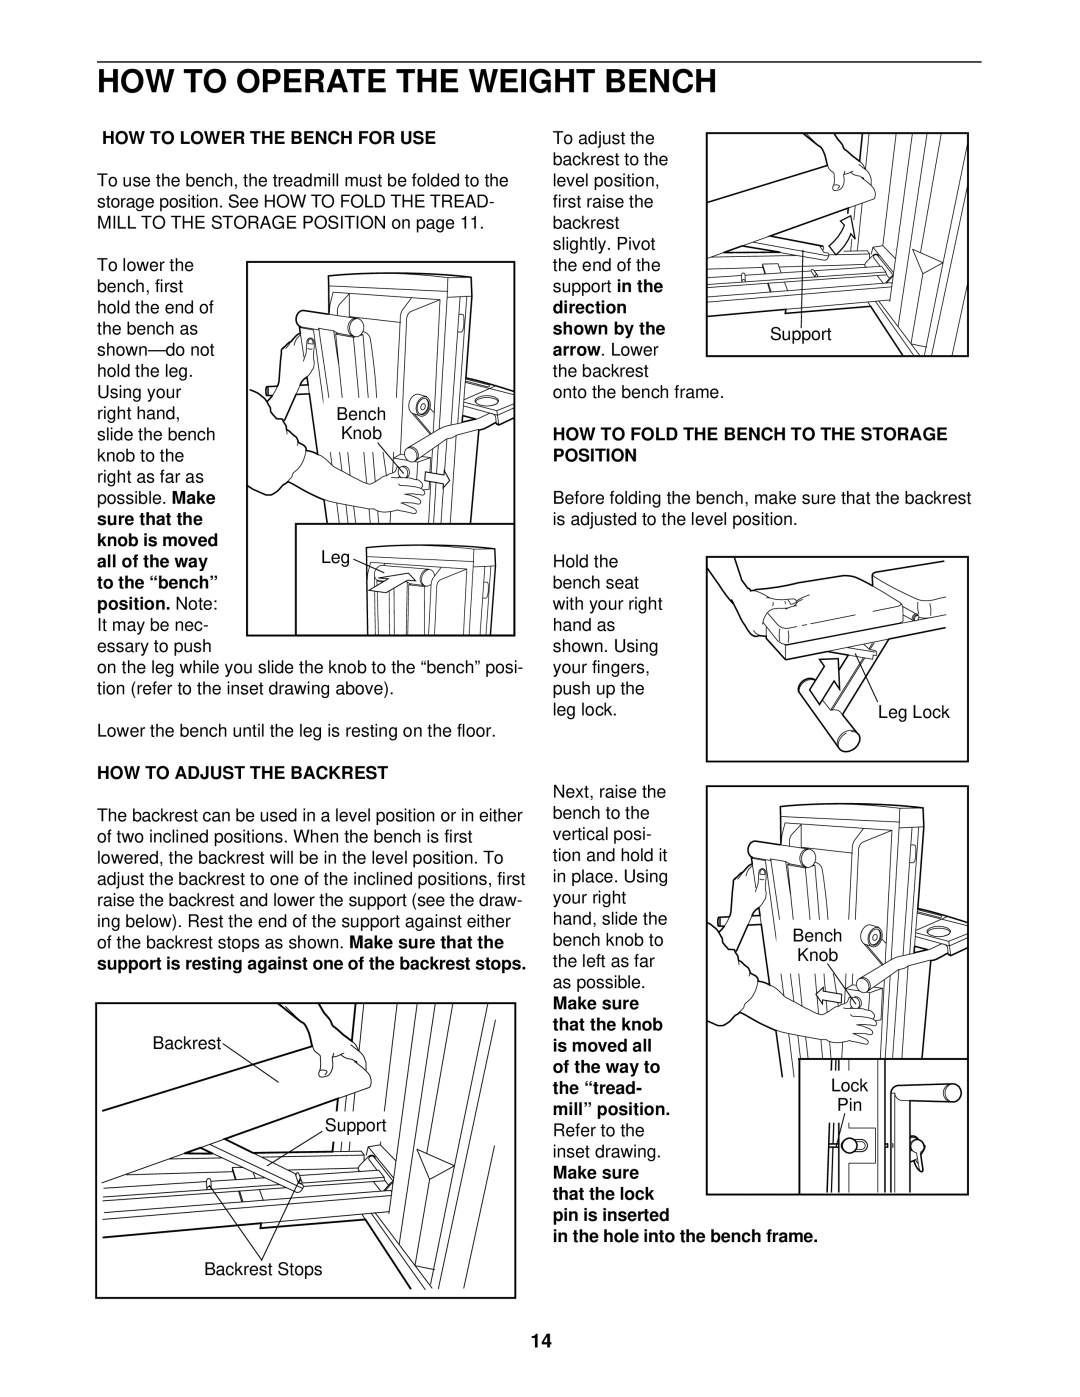 ProForm 831.297460 user manual HOW to Operate the Weight Bench, HOW to Lower the Bench for USE, HOW to Adjust the Backrest 